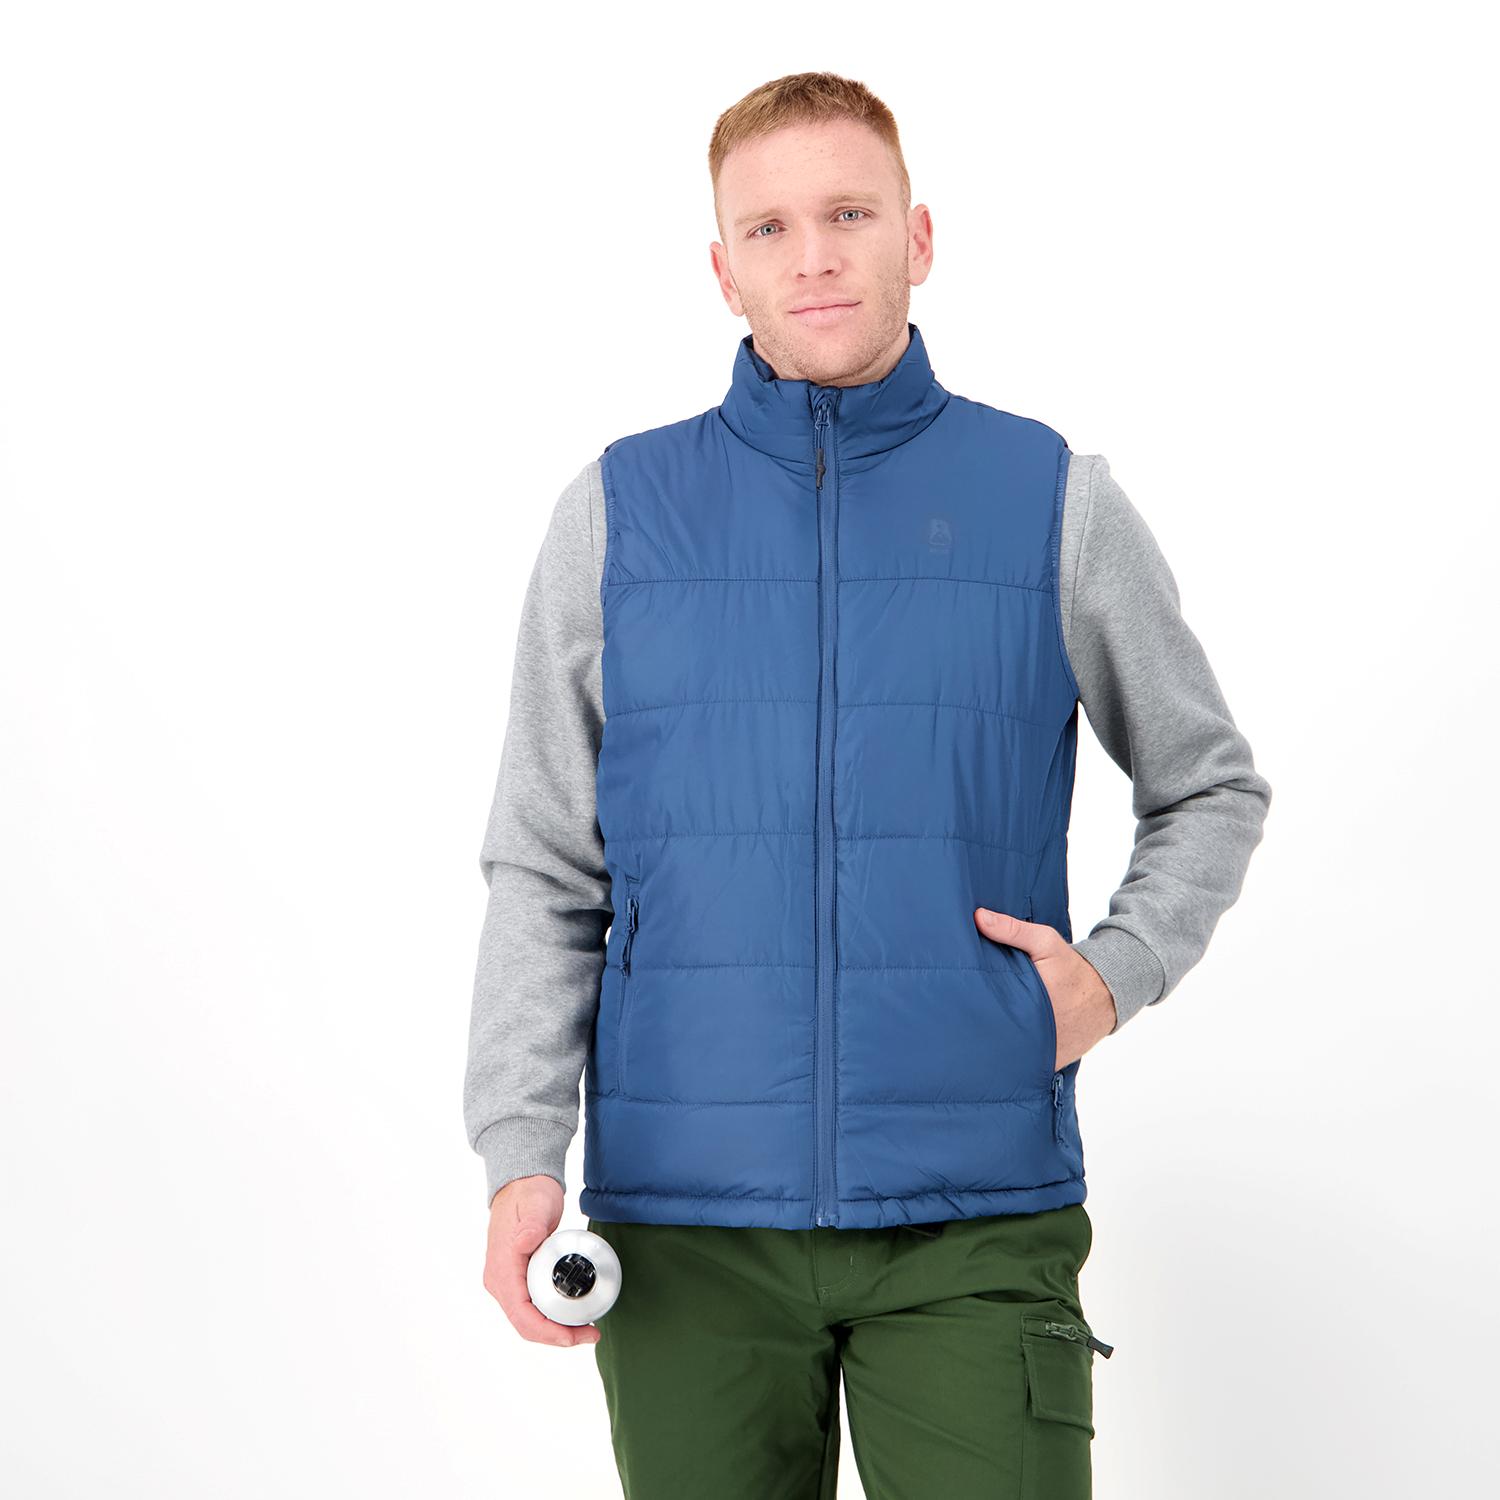 Chaleco Softshell Flux hombre